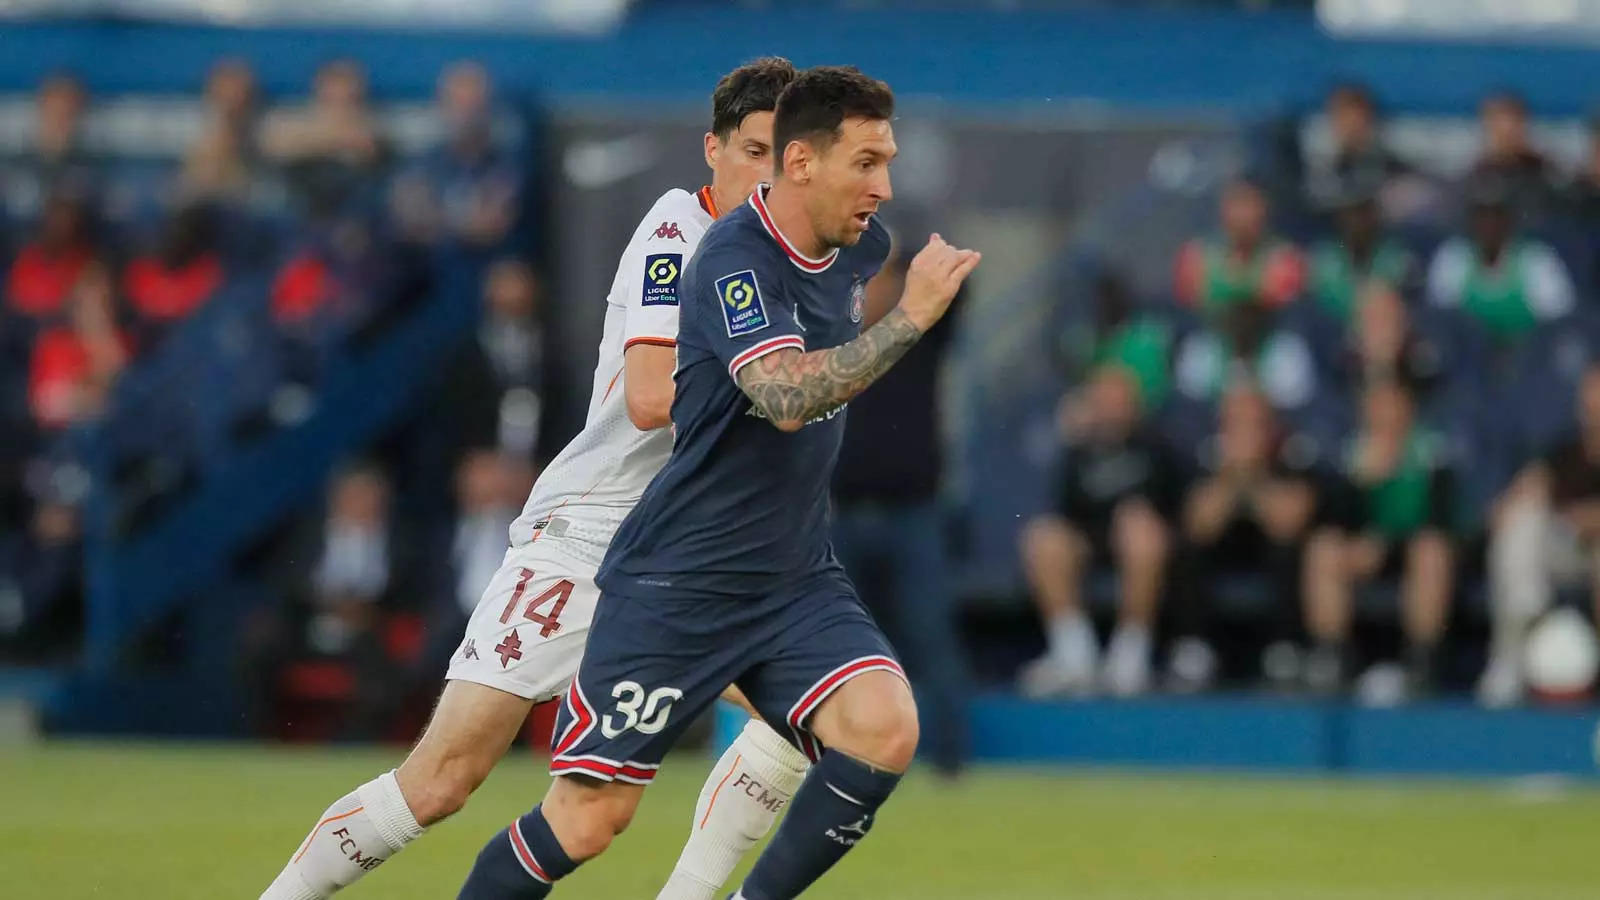 Lionel Messi had an indifferent first season at PSG